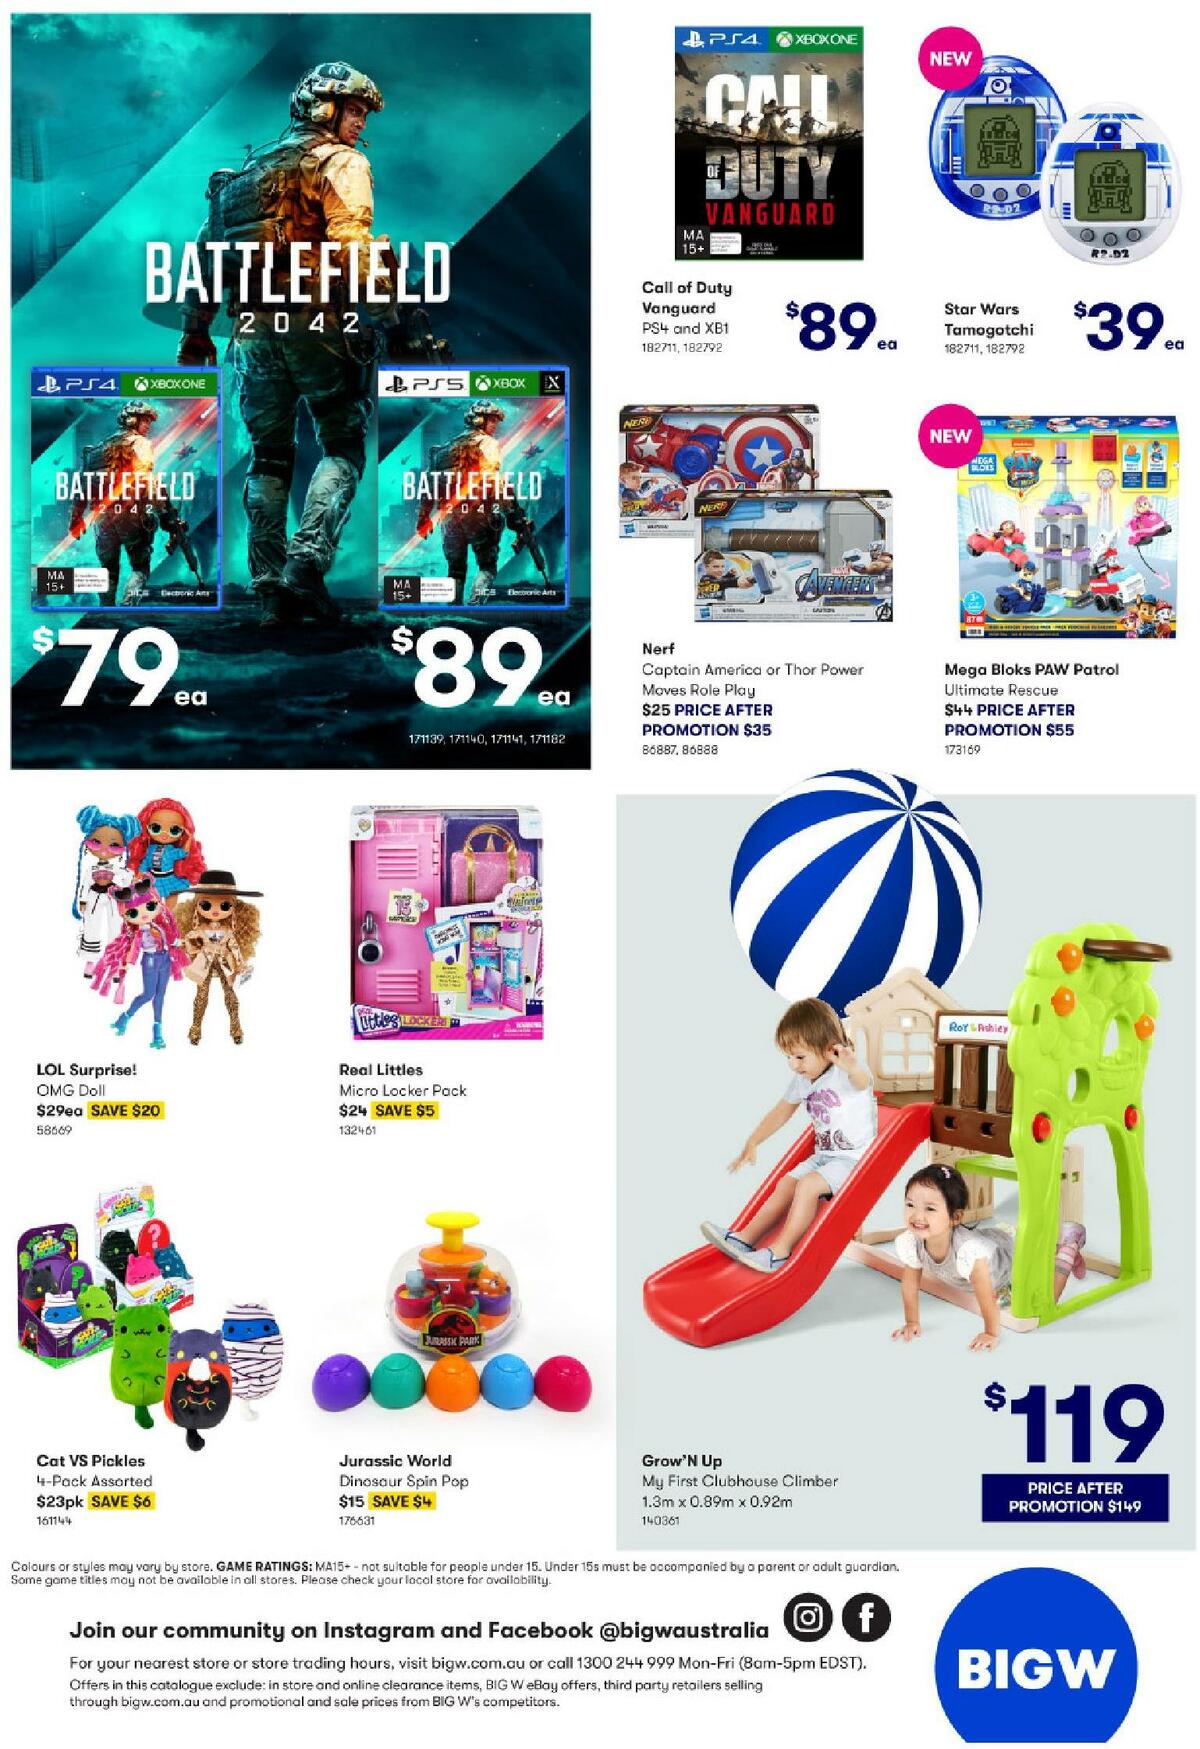 Big W Catalogues from 25 November